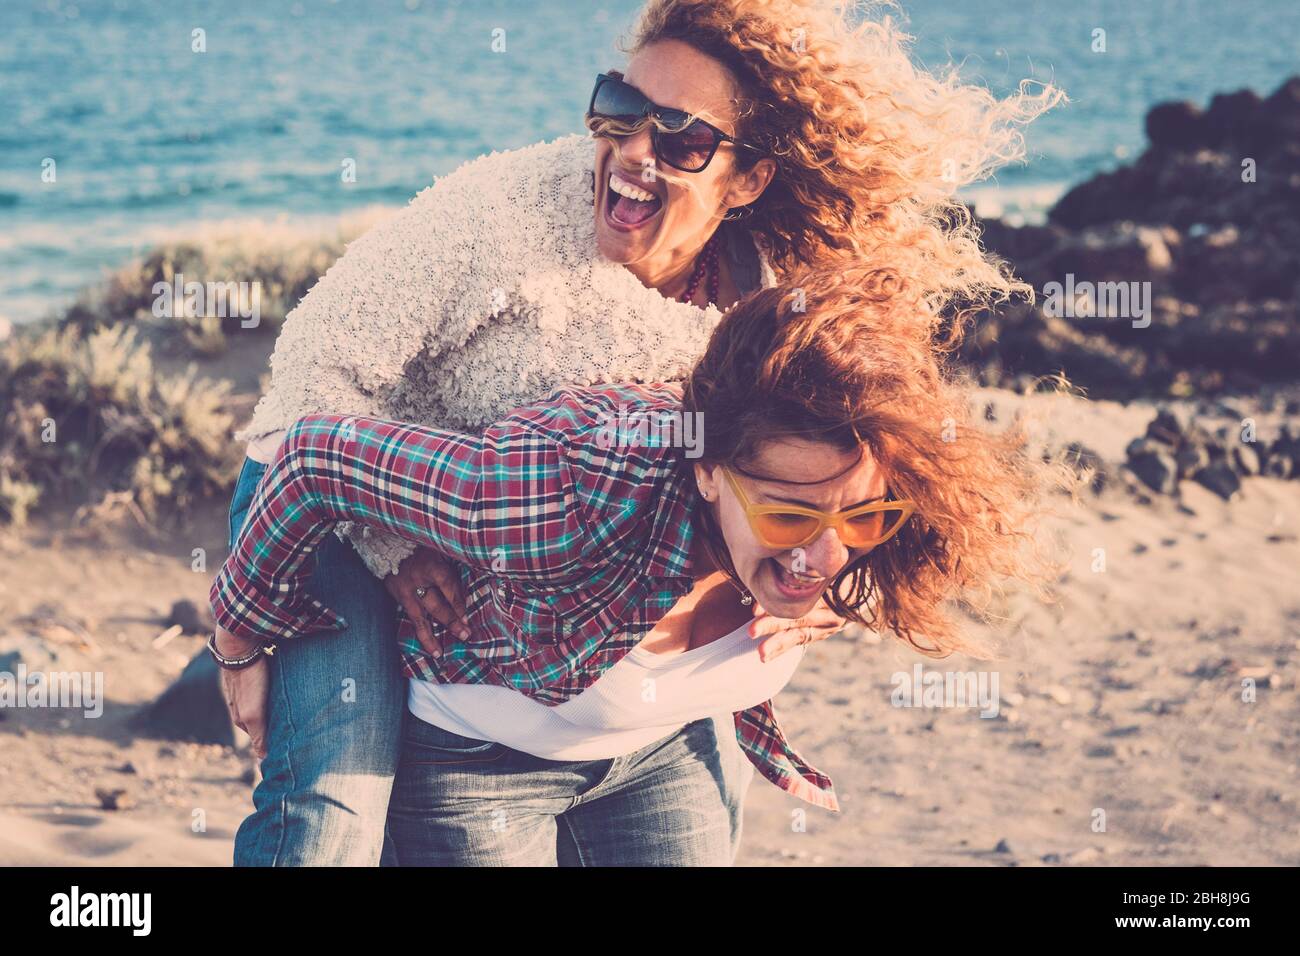 People laughing a lot and have fun together in friendship in outdoor leisure activity - couple of women gone crazy carrying eachother on the shoulder - no limit age to be playful and happy Stock Photo